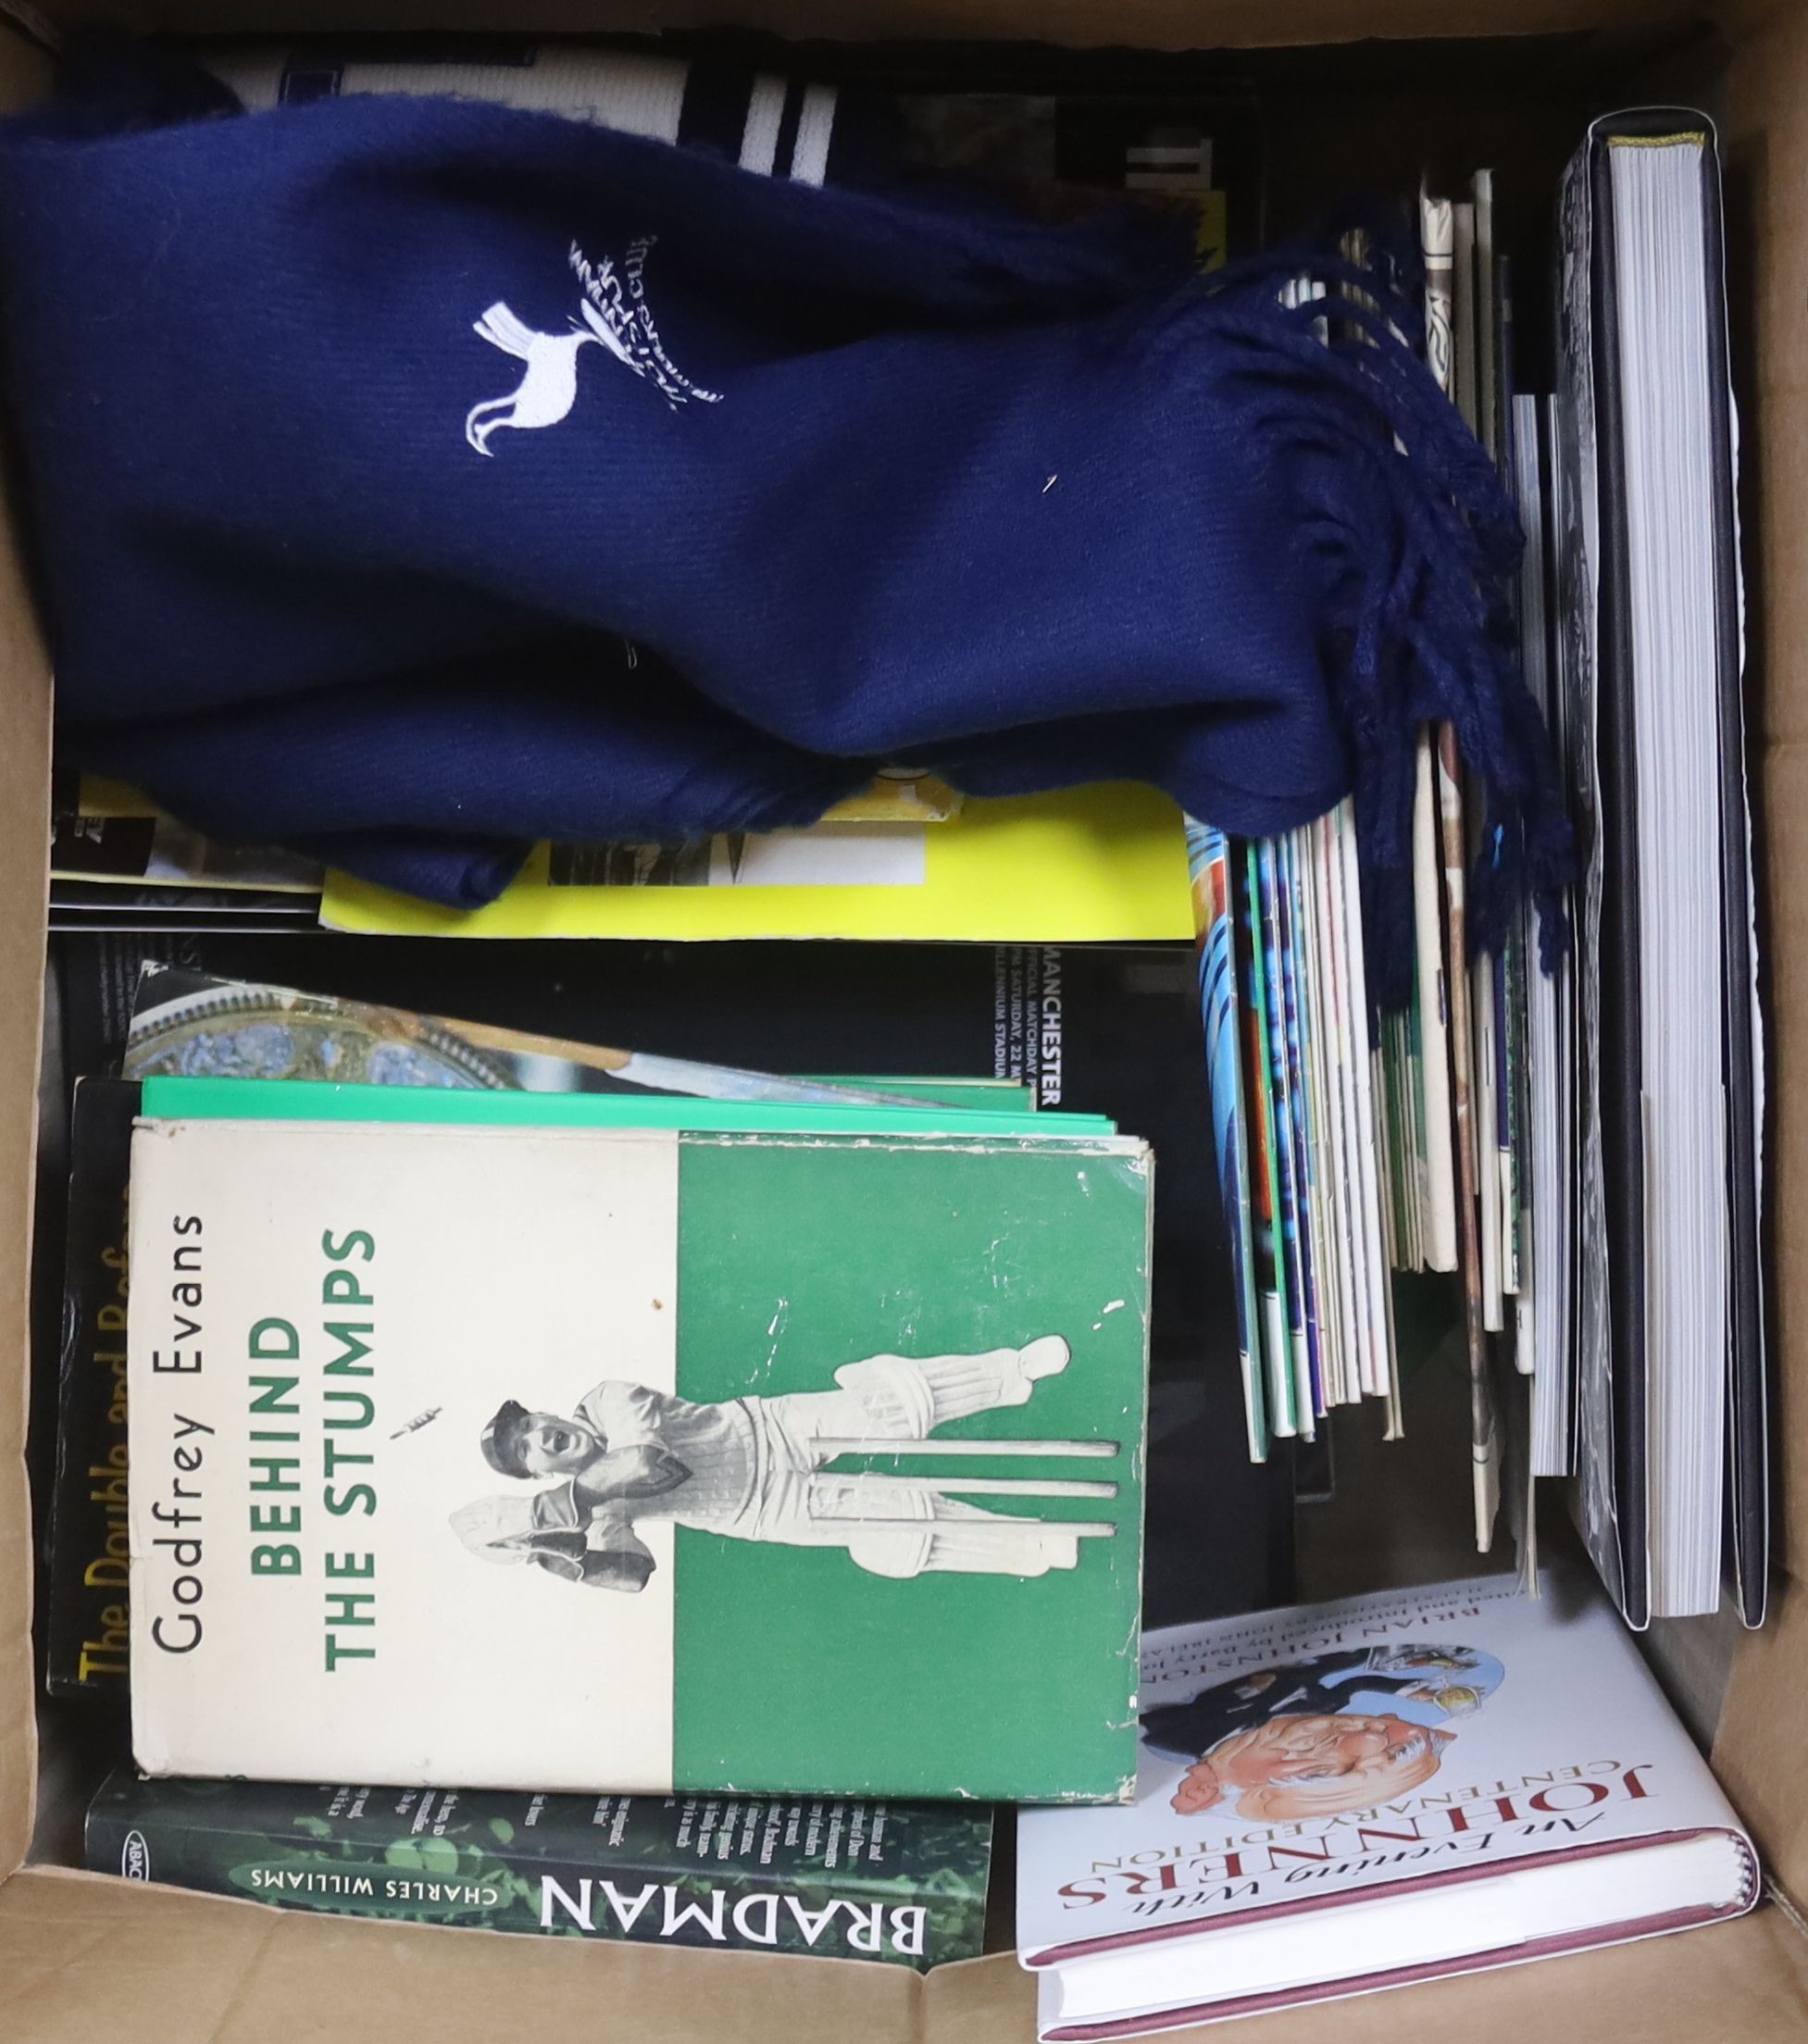 A small group of sporting books, including some signed, The Bradman Albums, a Ted Dexter signed miniature bat, Tottenham Hotspur ephemera and Cup Final programmes from the 1940's.